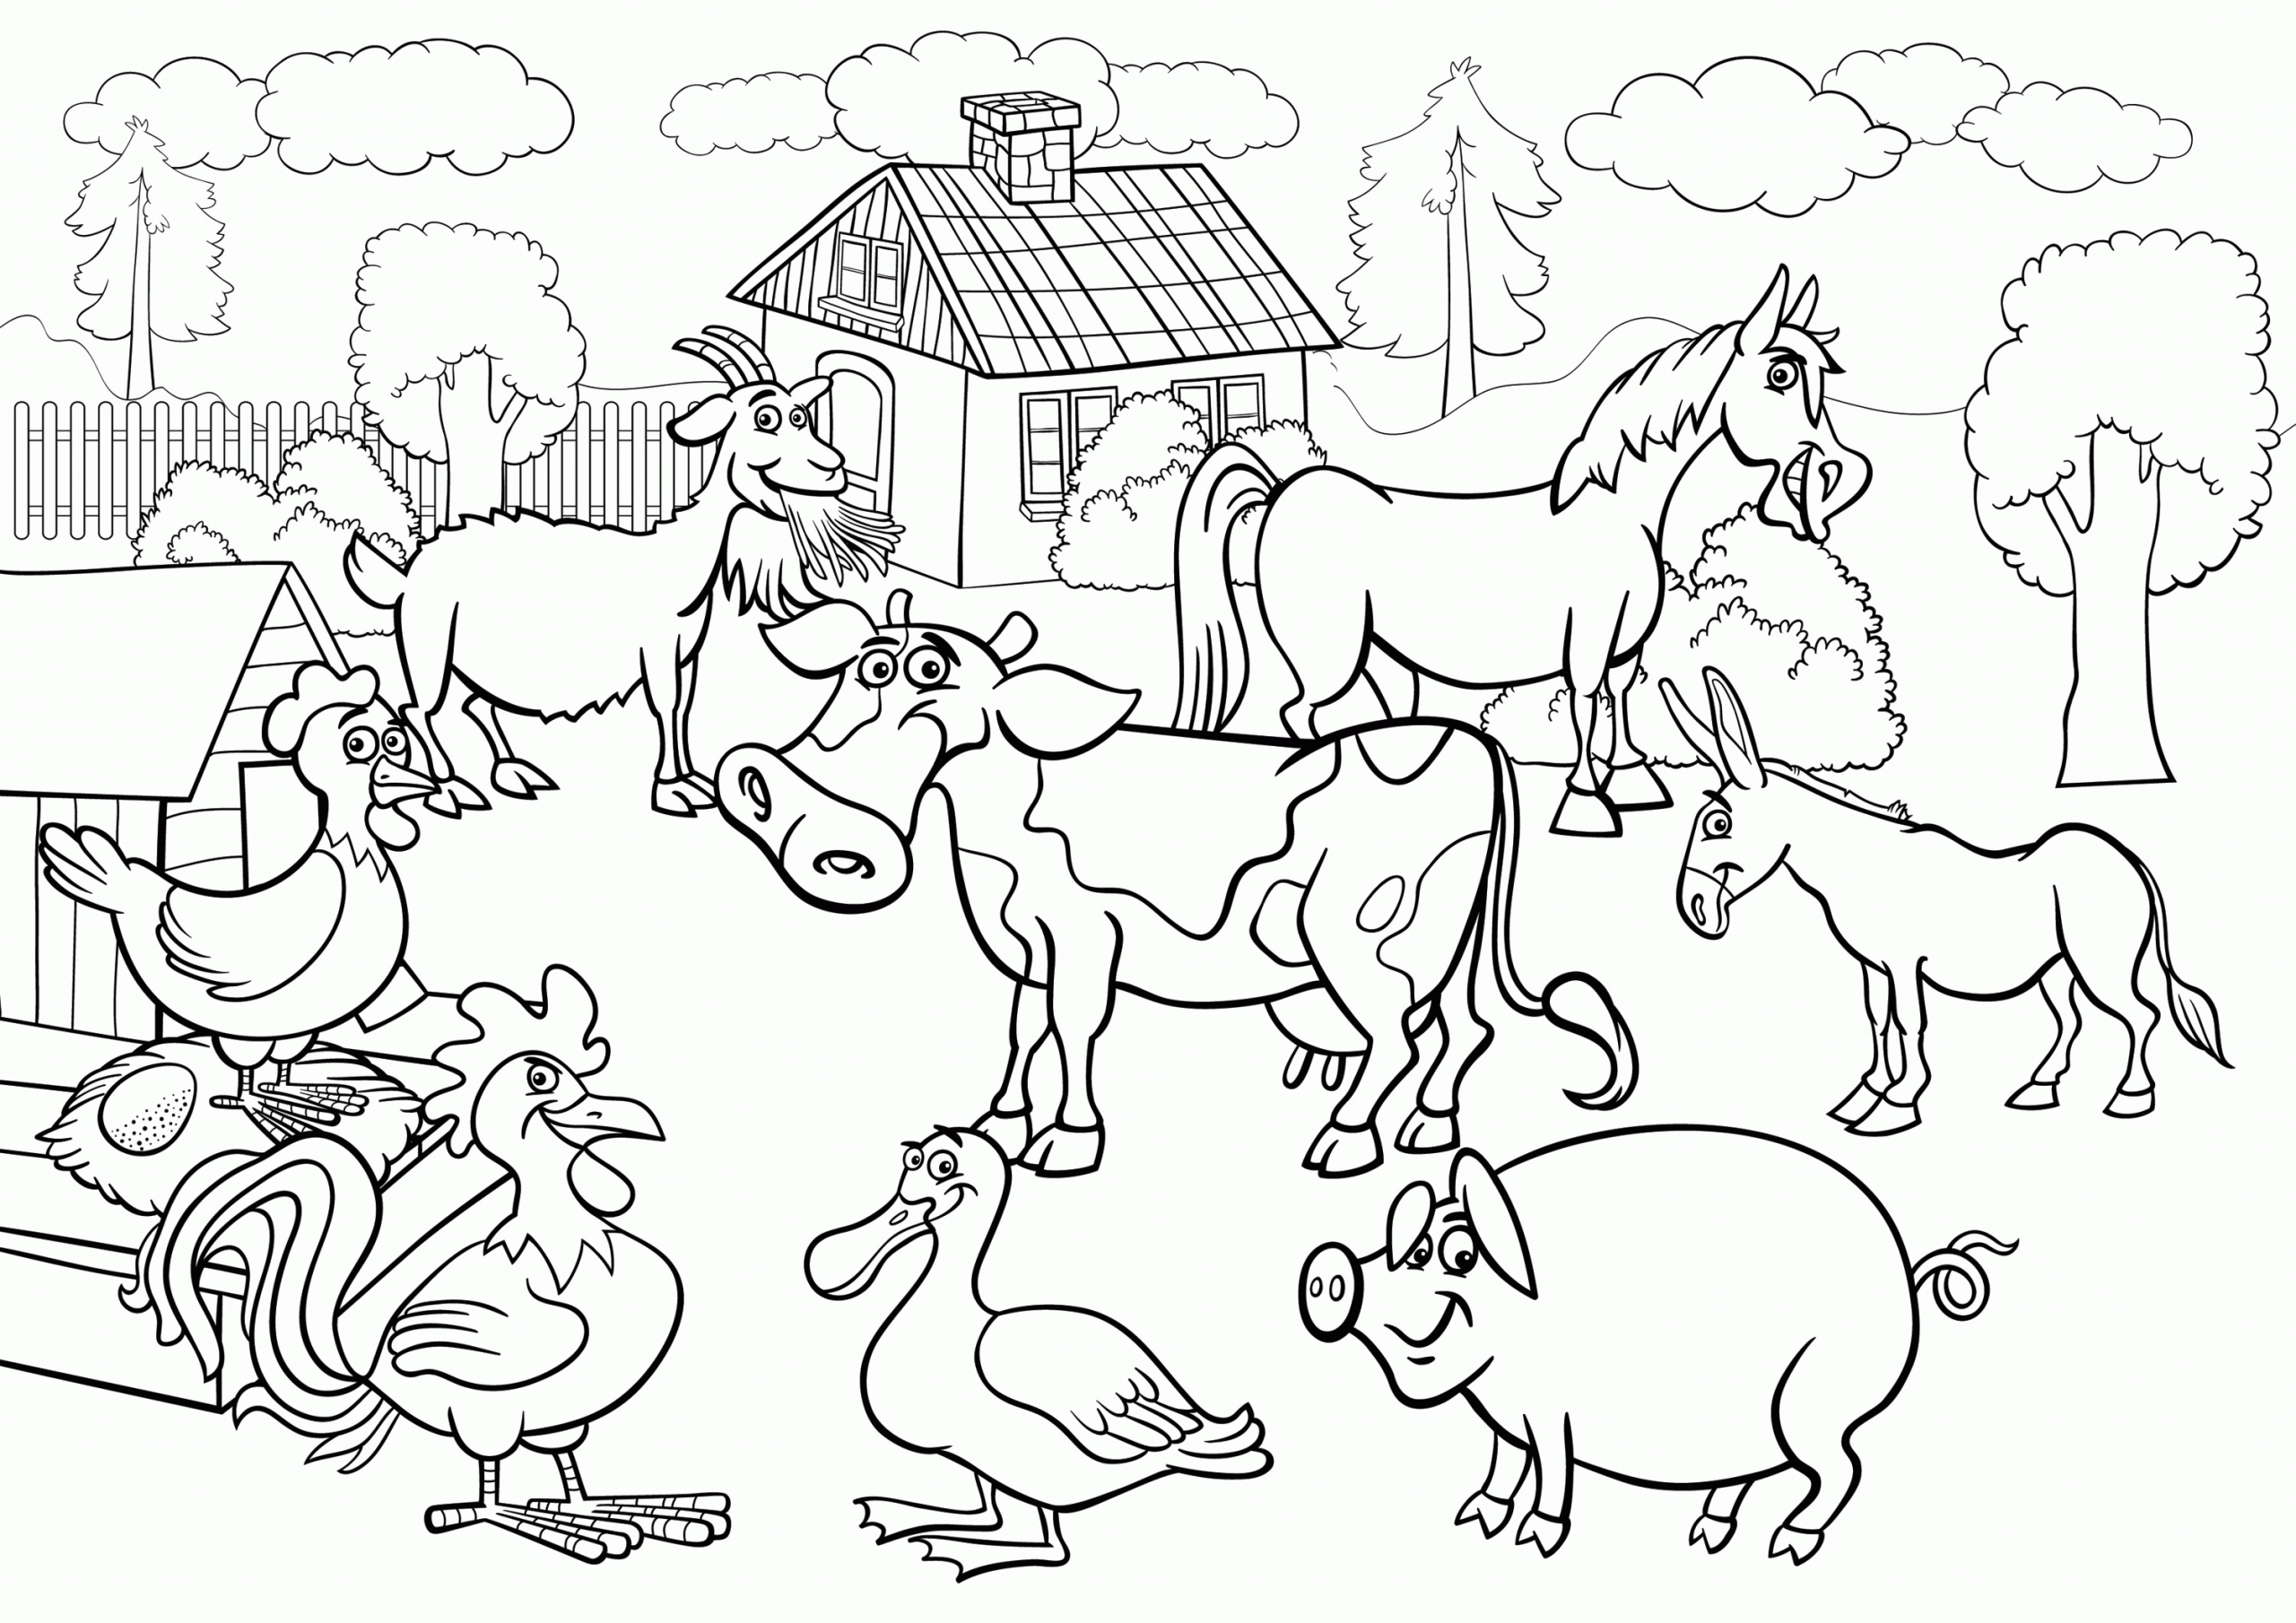 Animals In A Farm Coloring Page Free Printable Coloring Pages For Kids